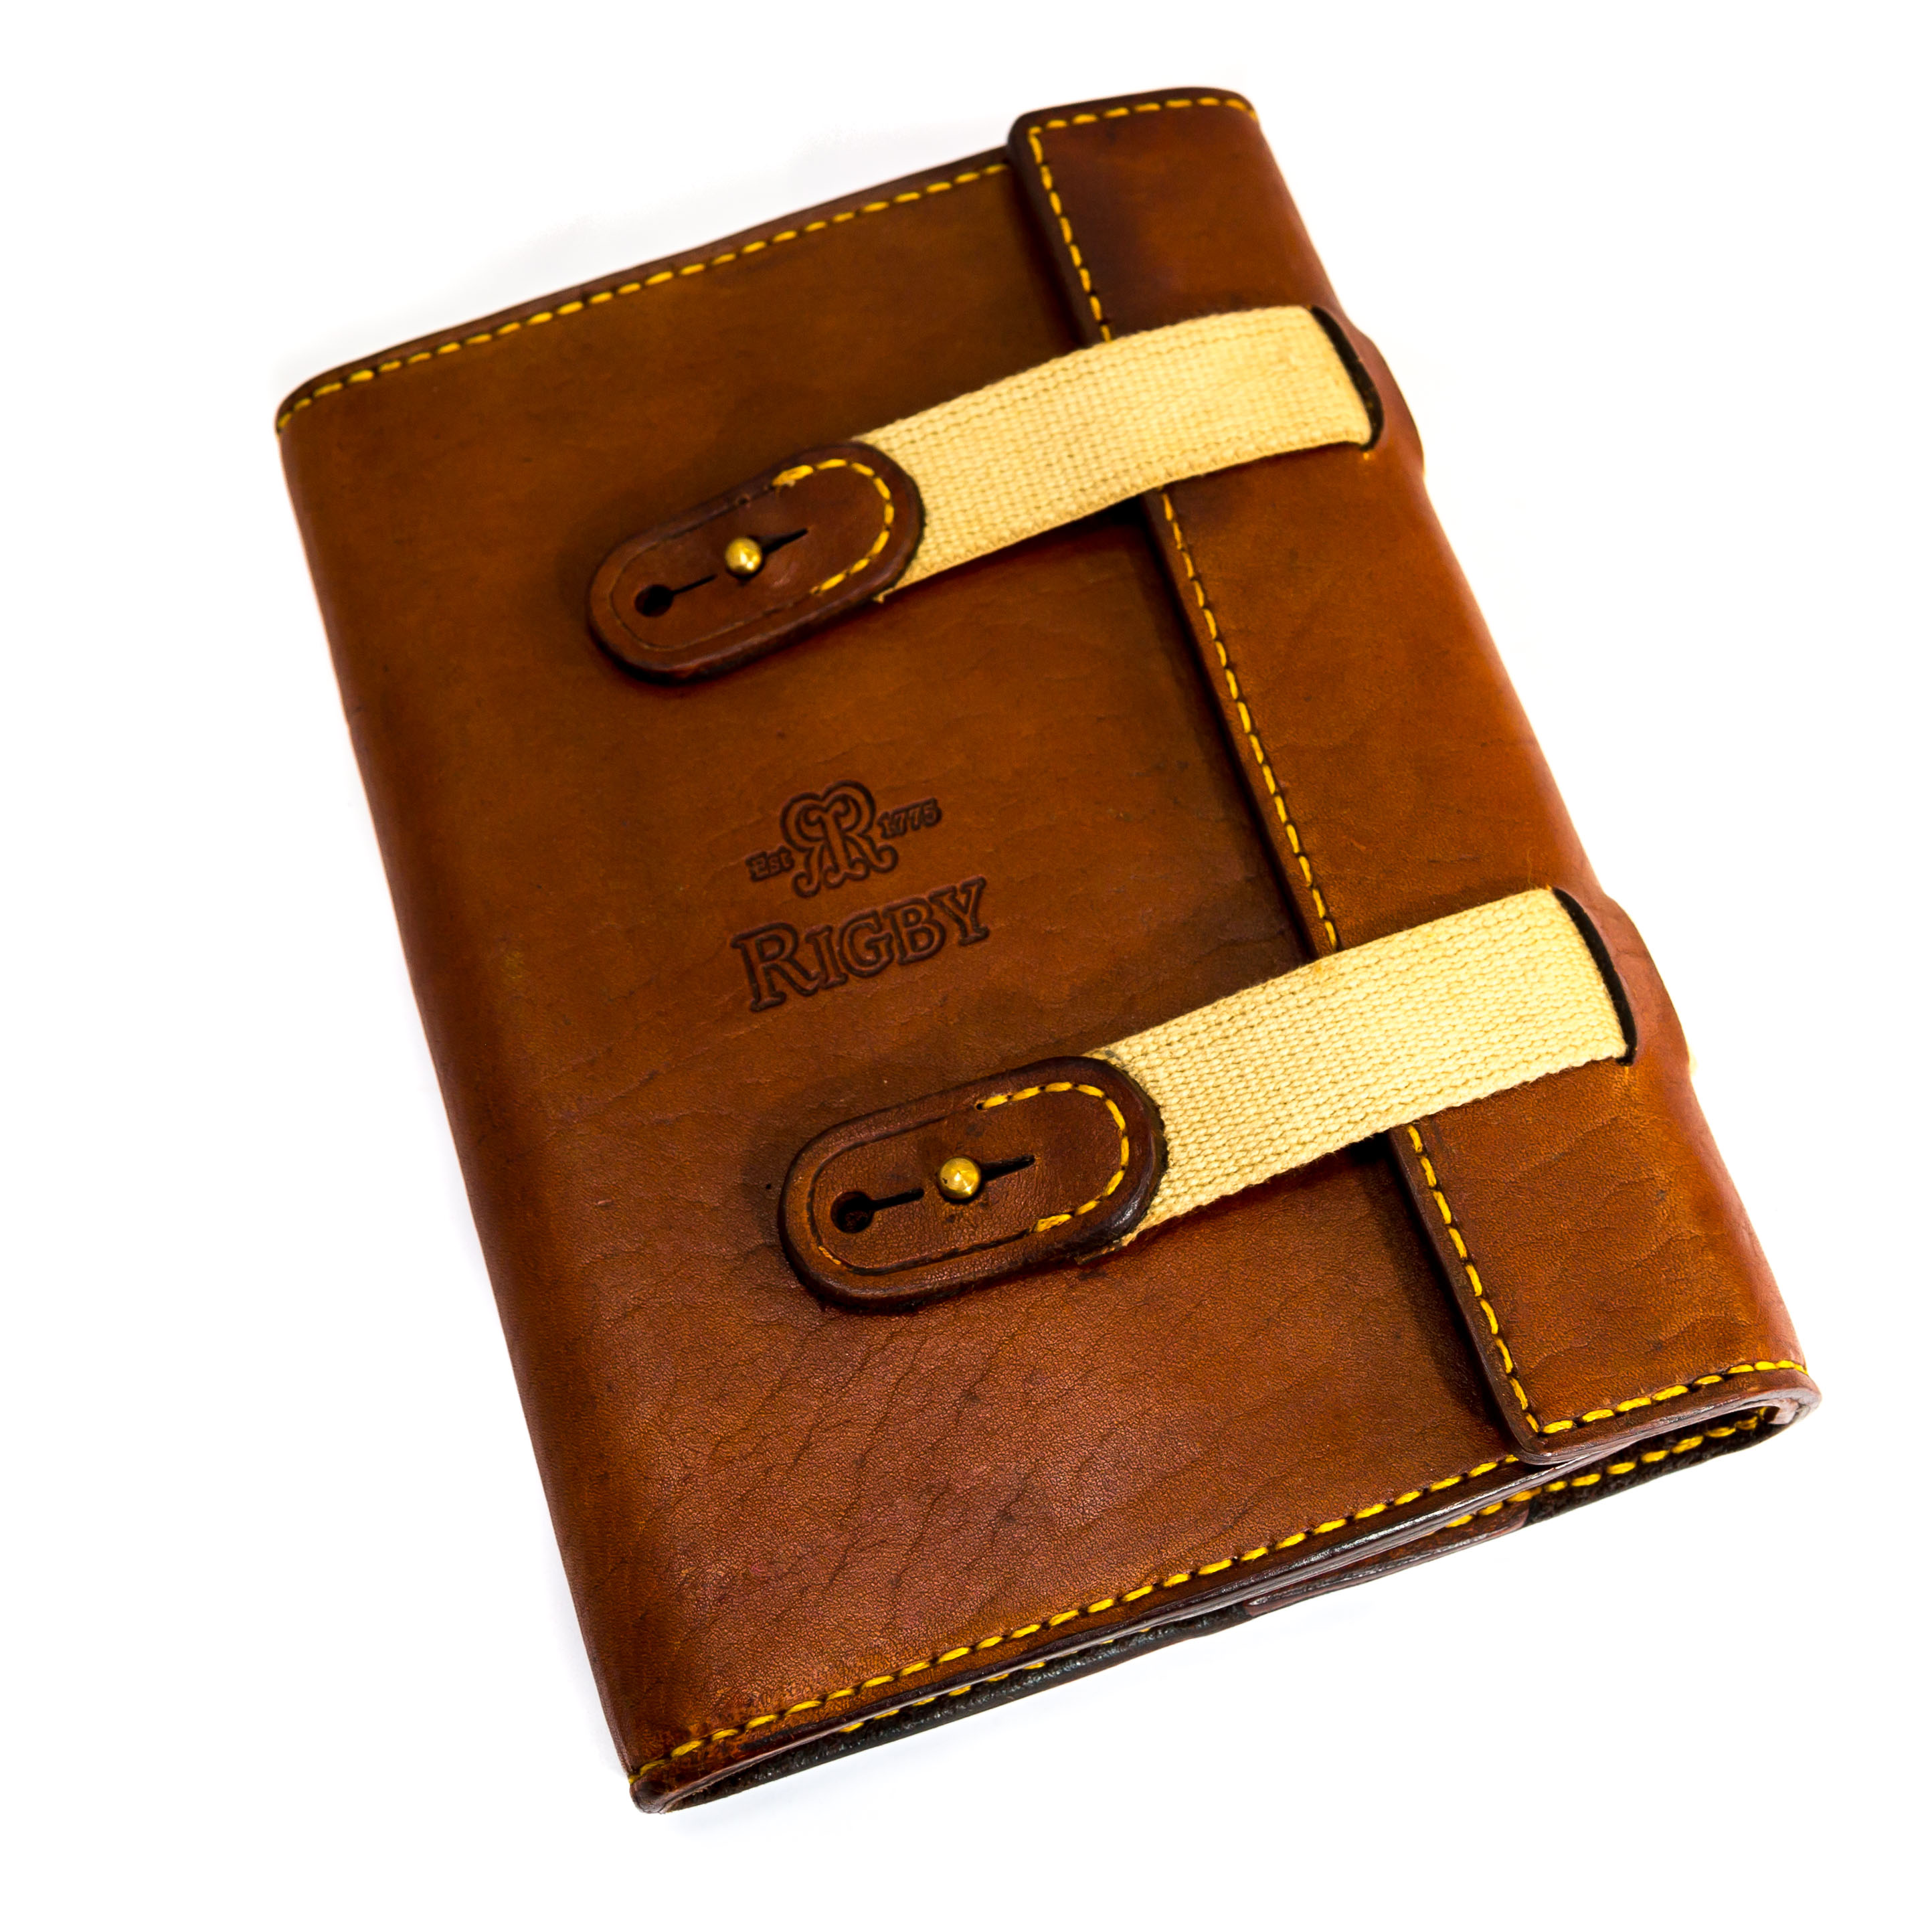 Rigby Leather and Canvas Notebook Cover